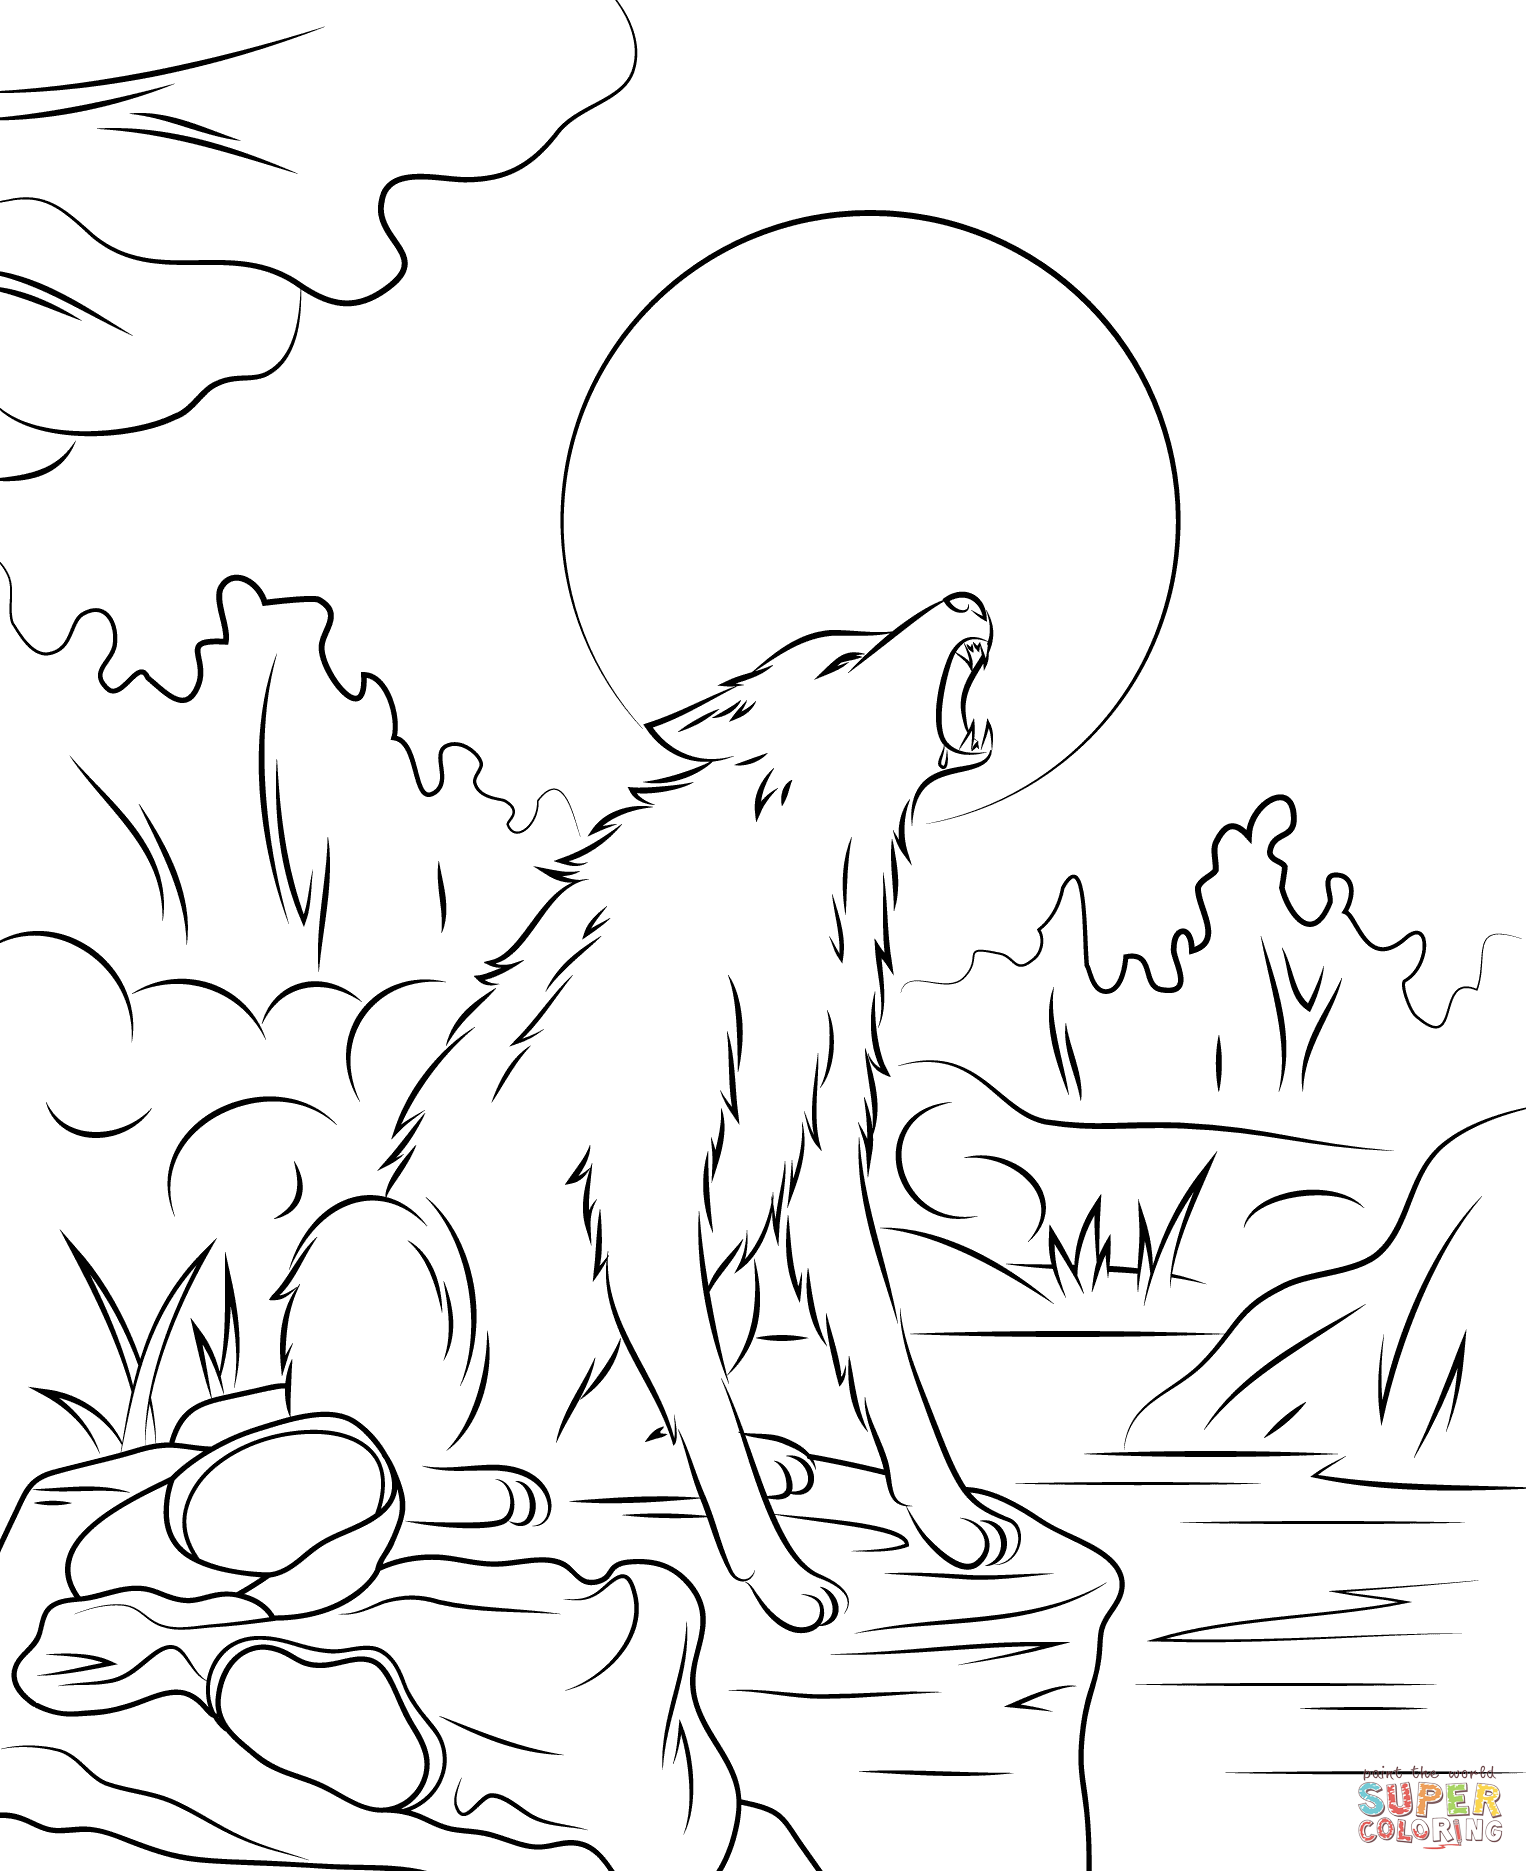 
Wolf Howling At The Moon Drawing Step By Step at